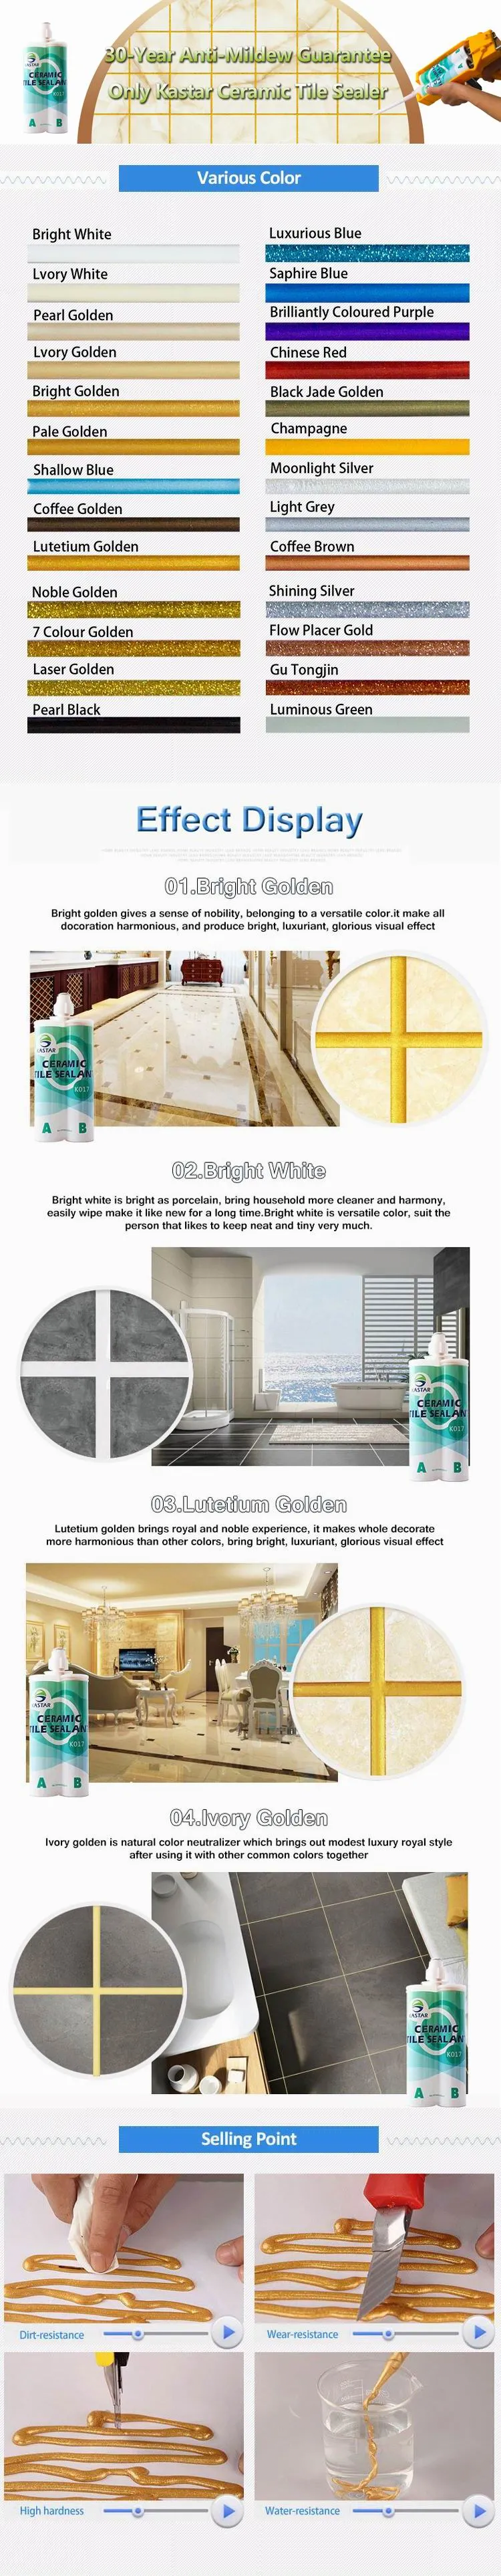 Epoxy Resin Stone Repair Insulation Epoxy Resin Ab Adhesive for Building Structural